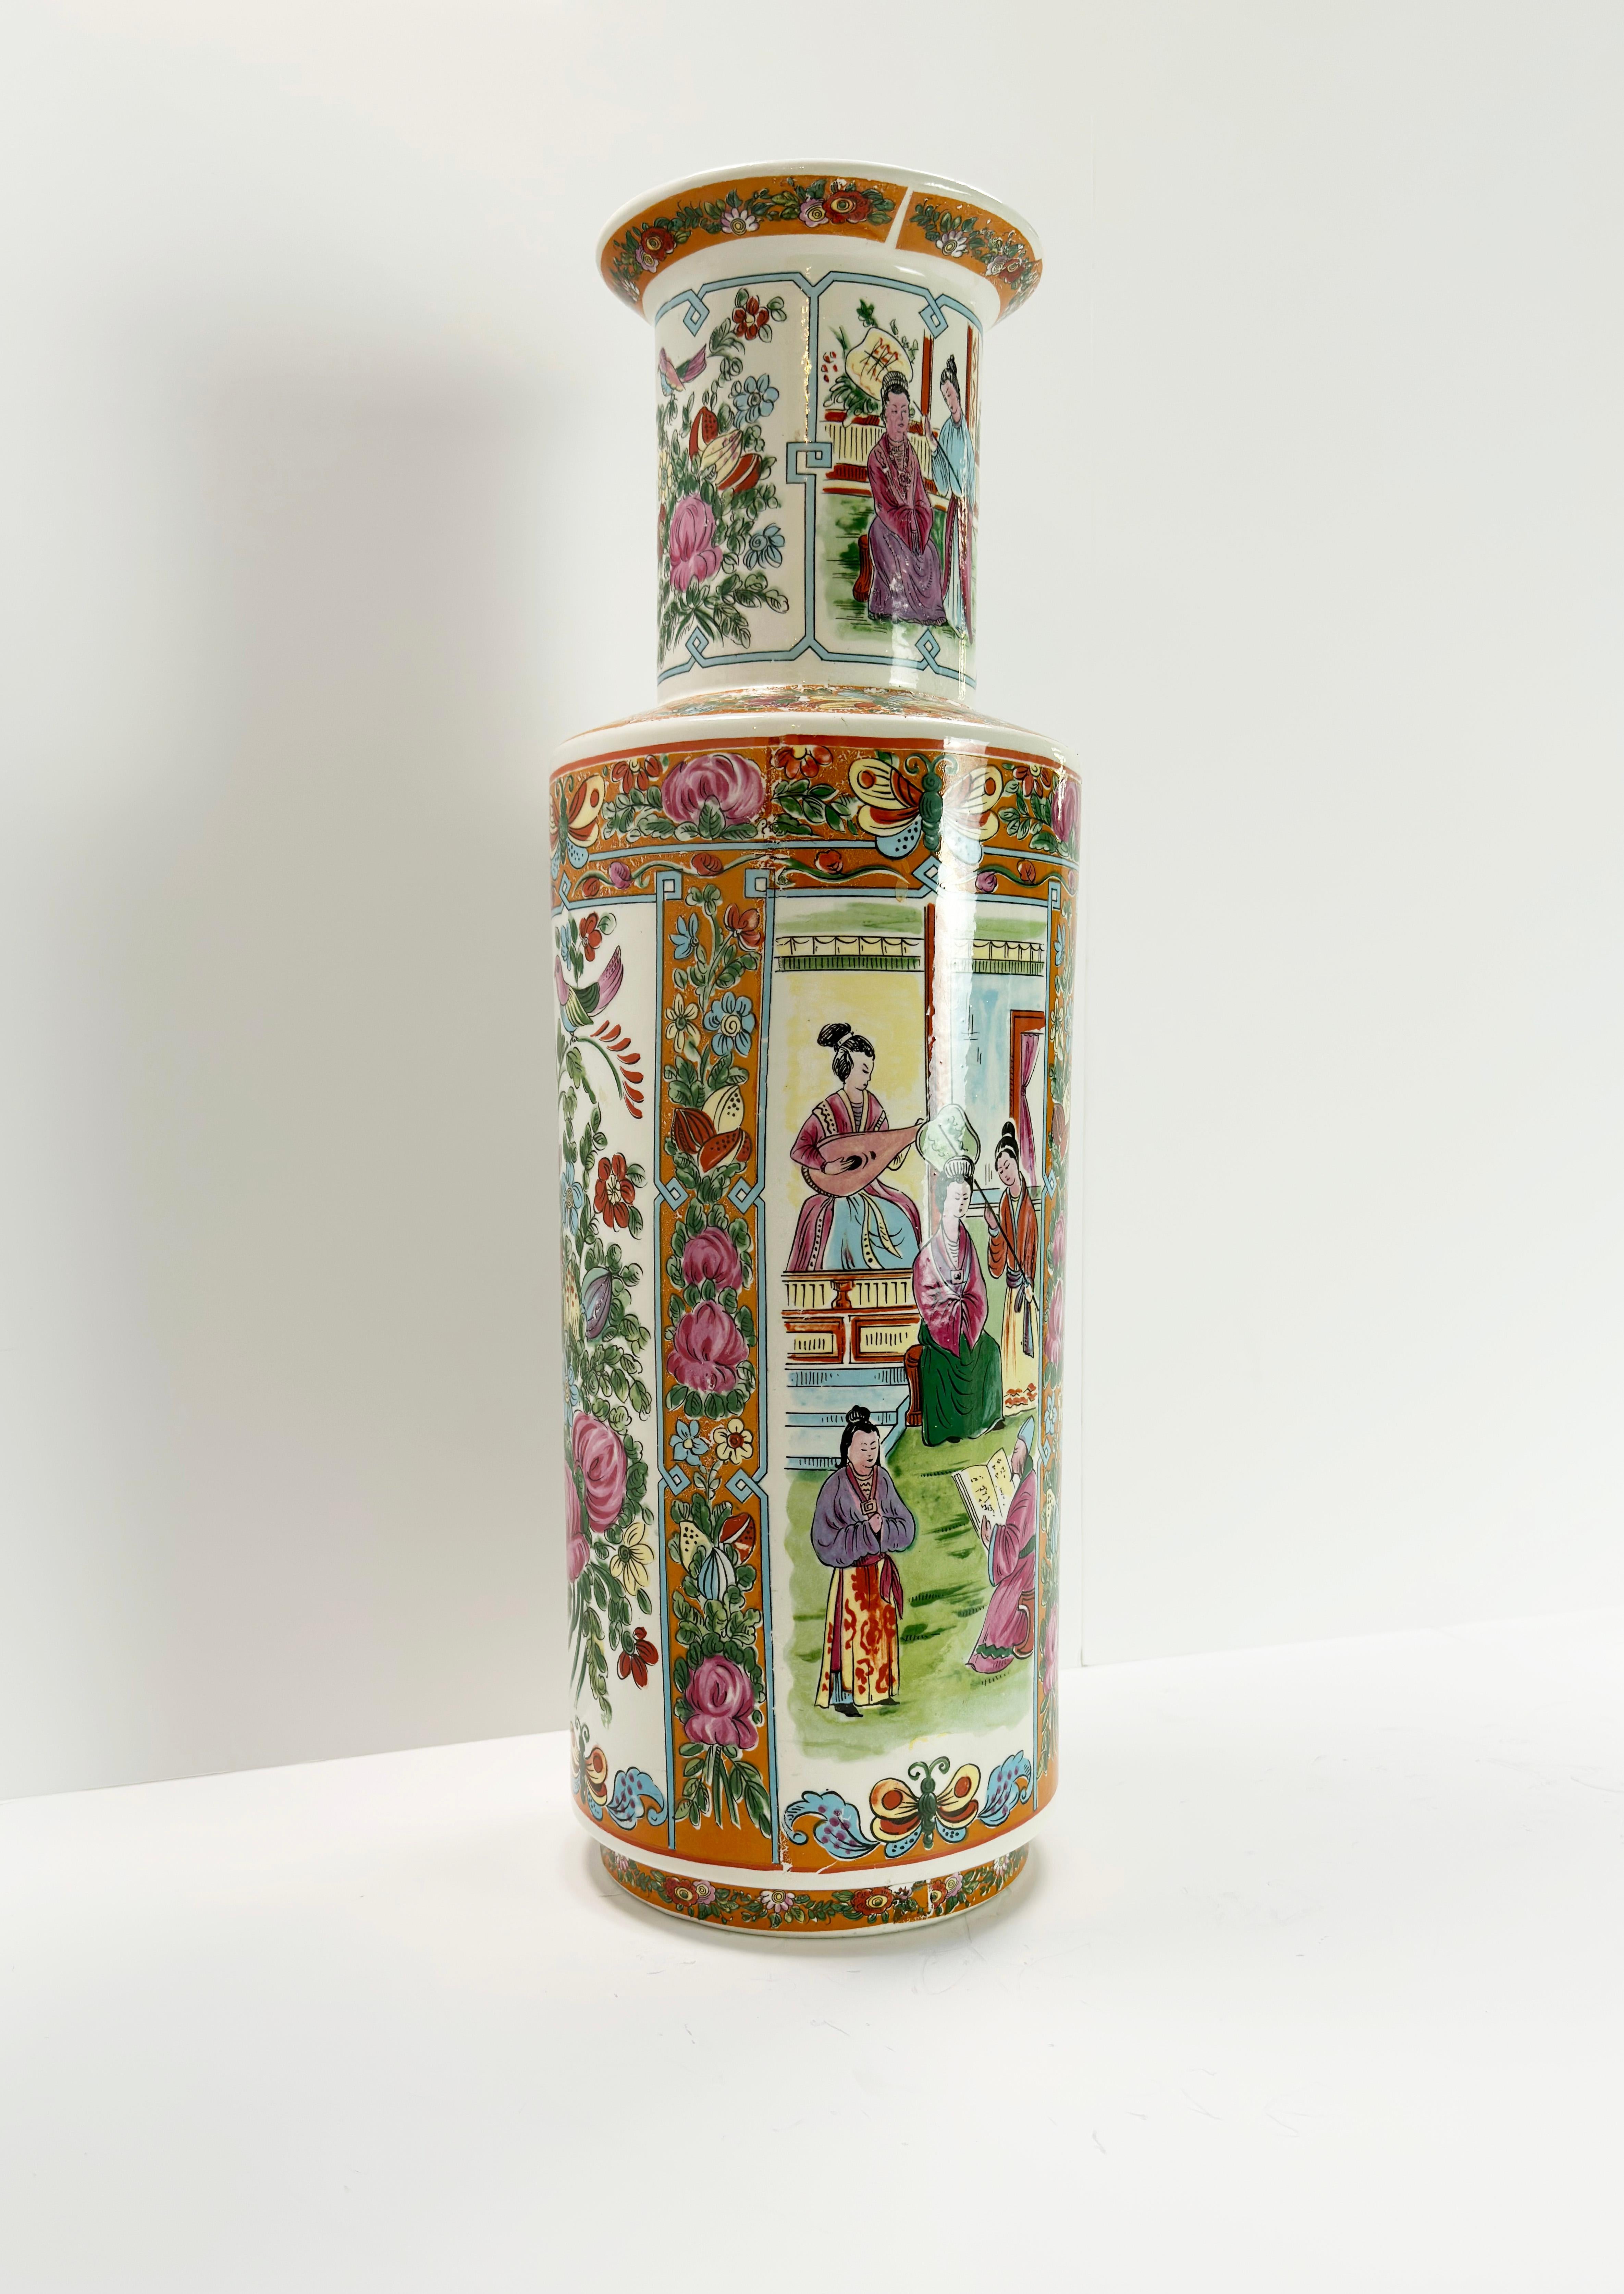 A vibrant and large Chinese Famille Rose porcelain rouleau floor vase 

Add a pop of color and elegance to your space with this eye-catching and large Chinese rouleau floor vase. Adorned in the classic Famille Rose style, it's a testament to the